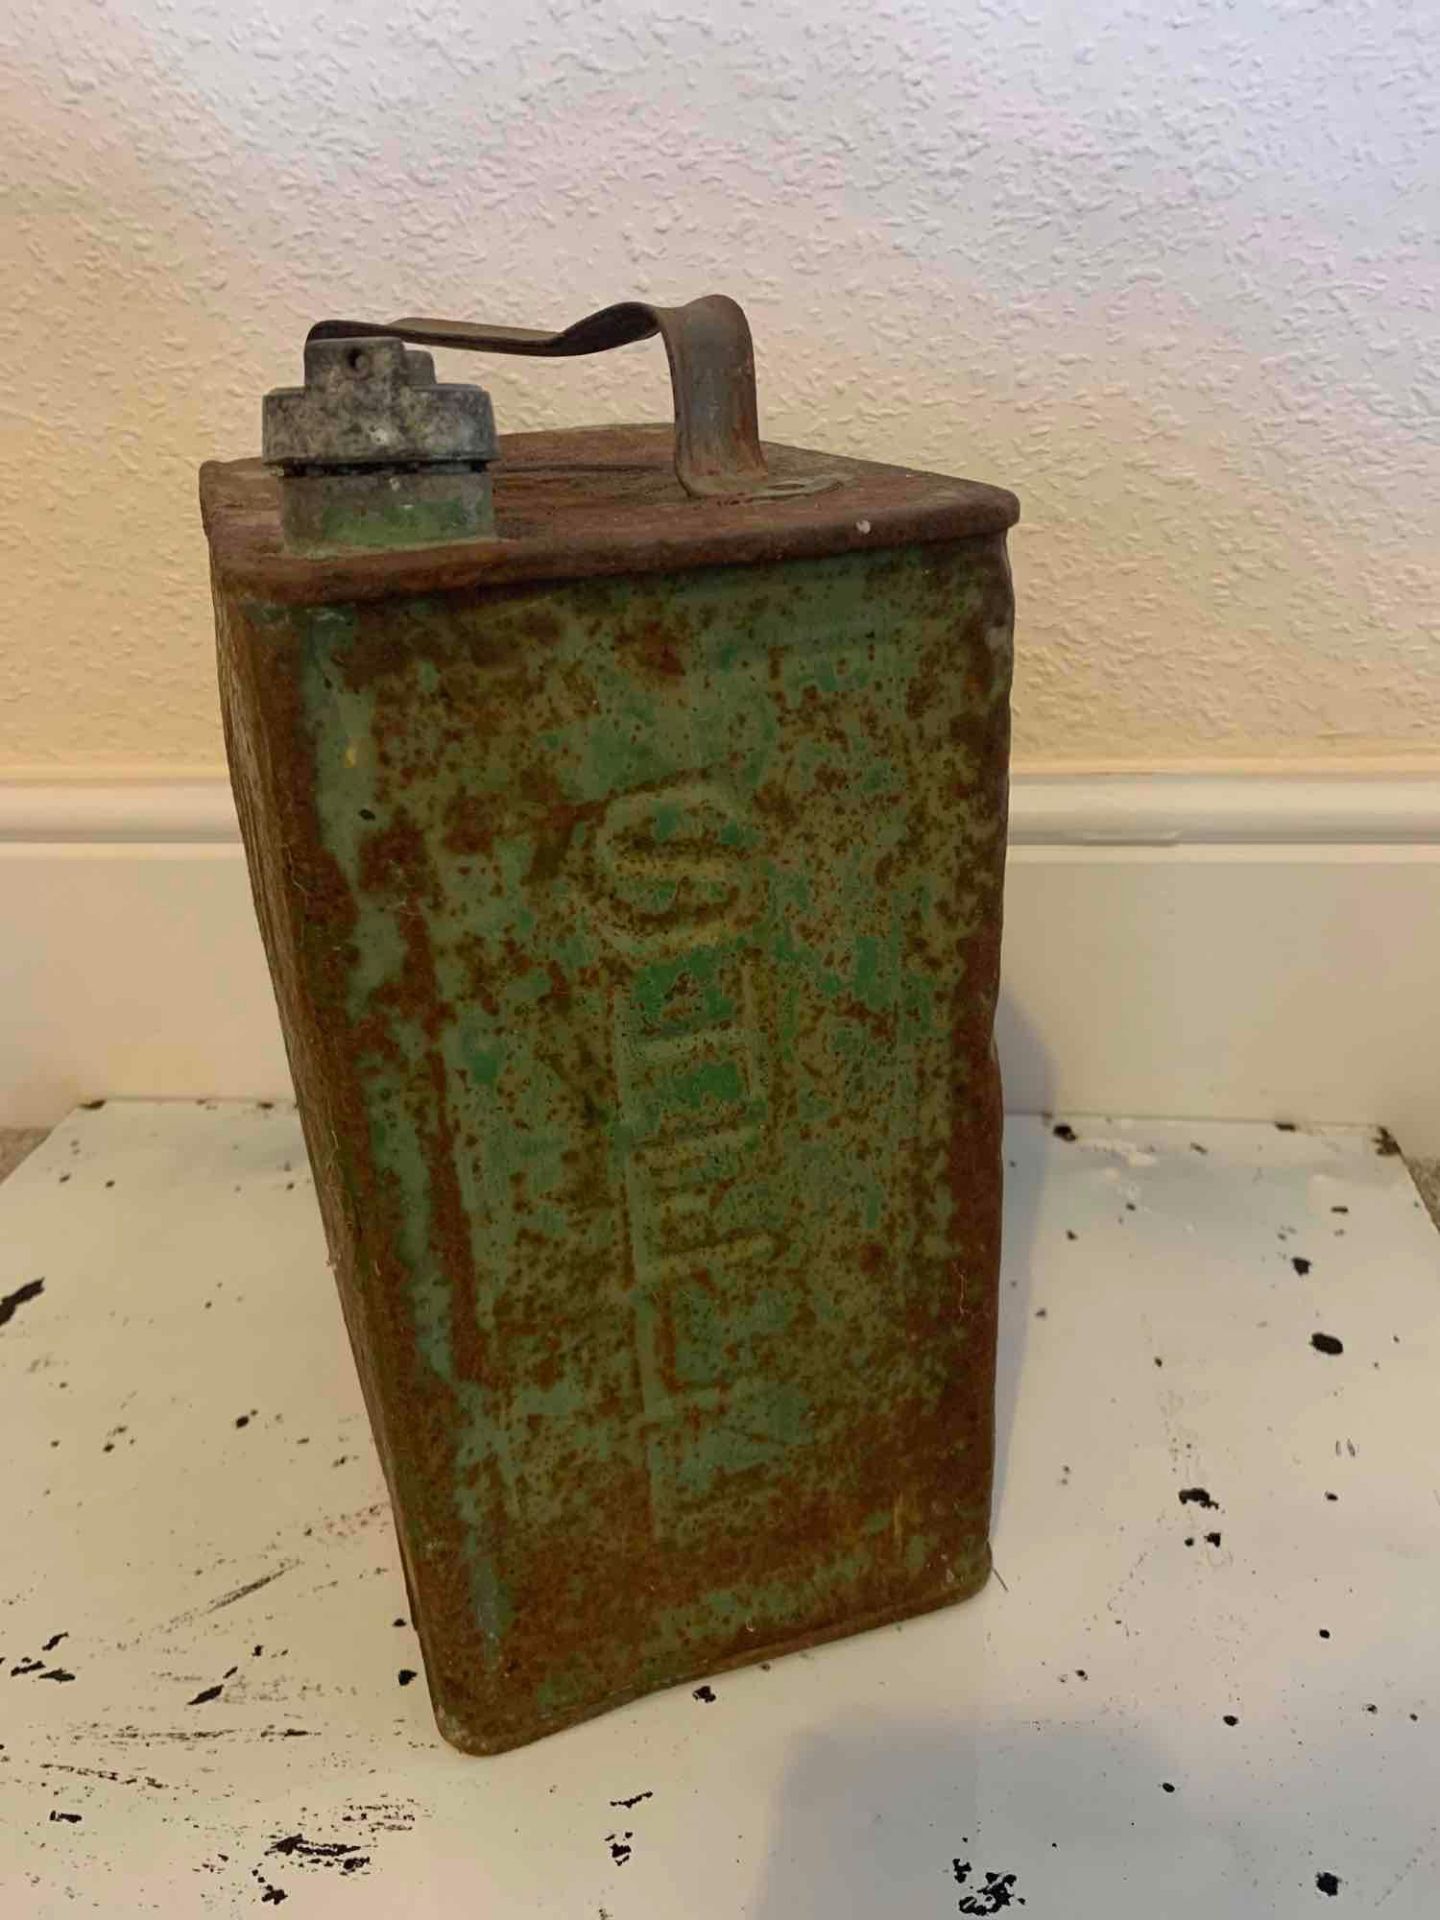 Shell Motor Spirit Metal Petrol Can. With Esso Lid In Original Colours With Significant Rusting - Image 4 of 6